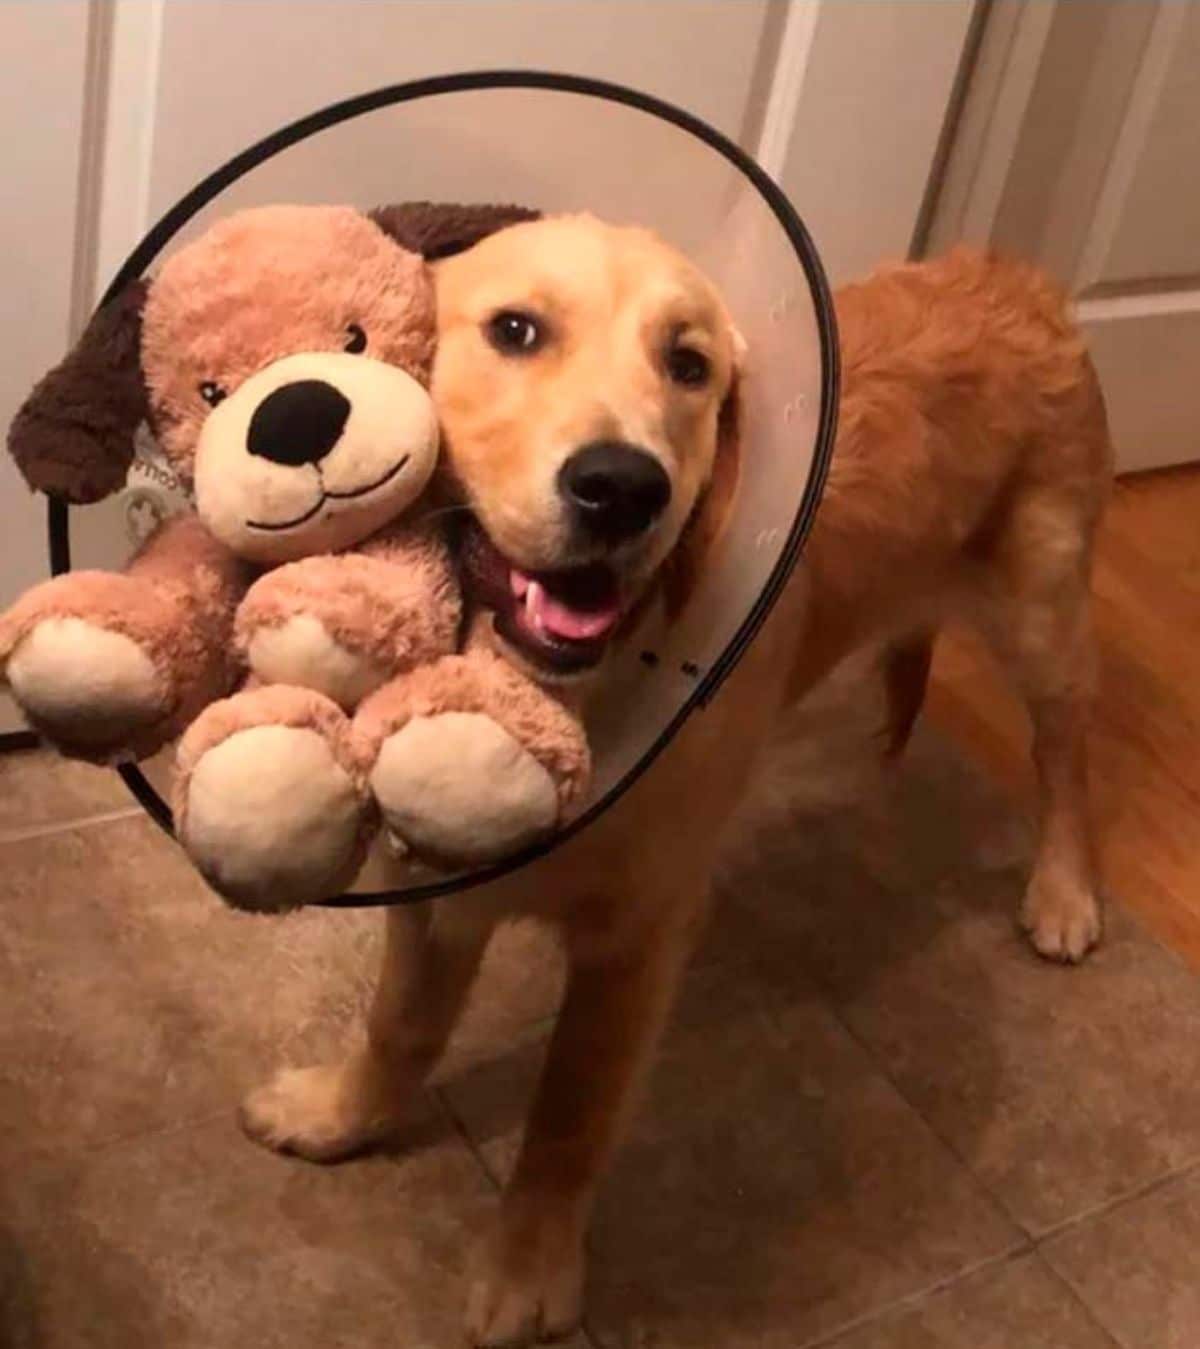 golden retriever standing wearing a plastic cone with a brown teddy bear in the cone next to the dog's face